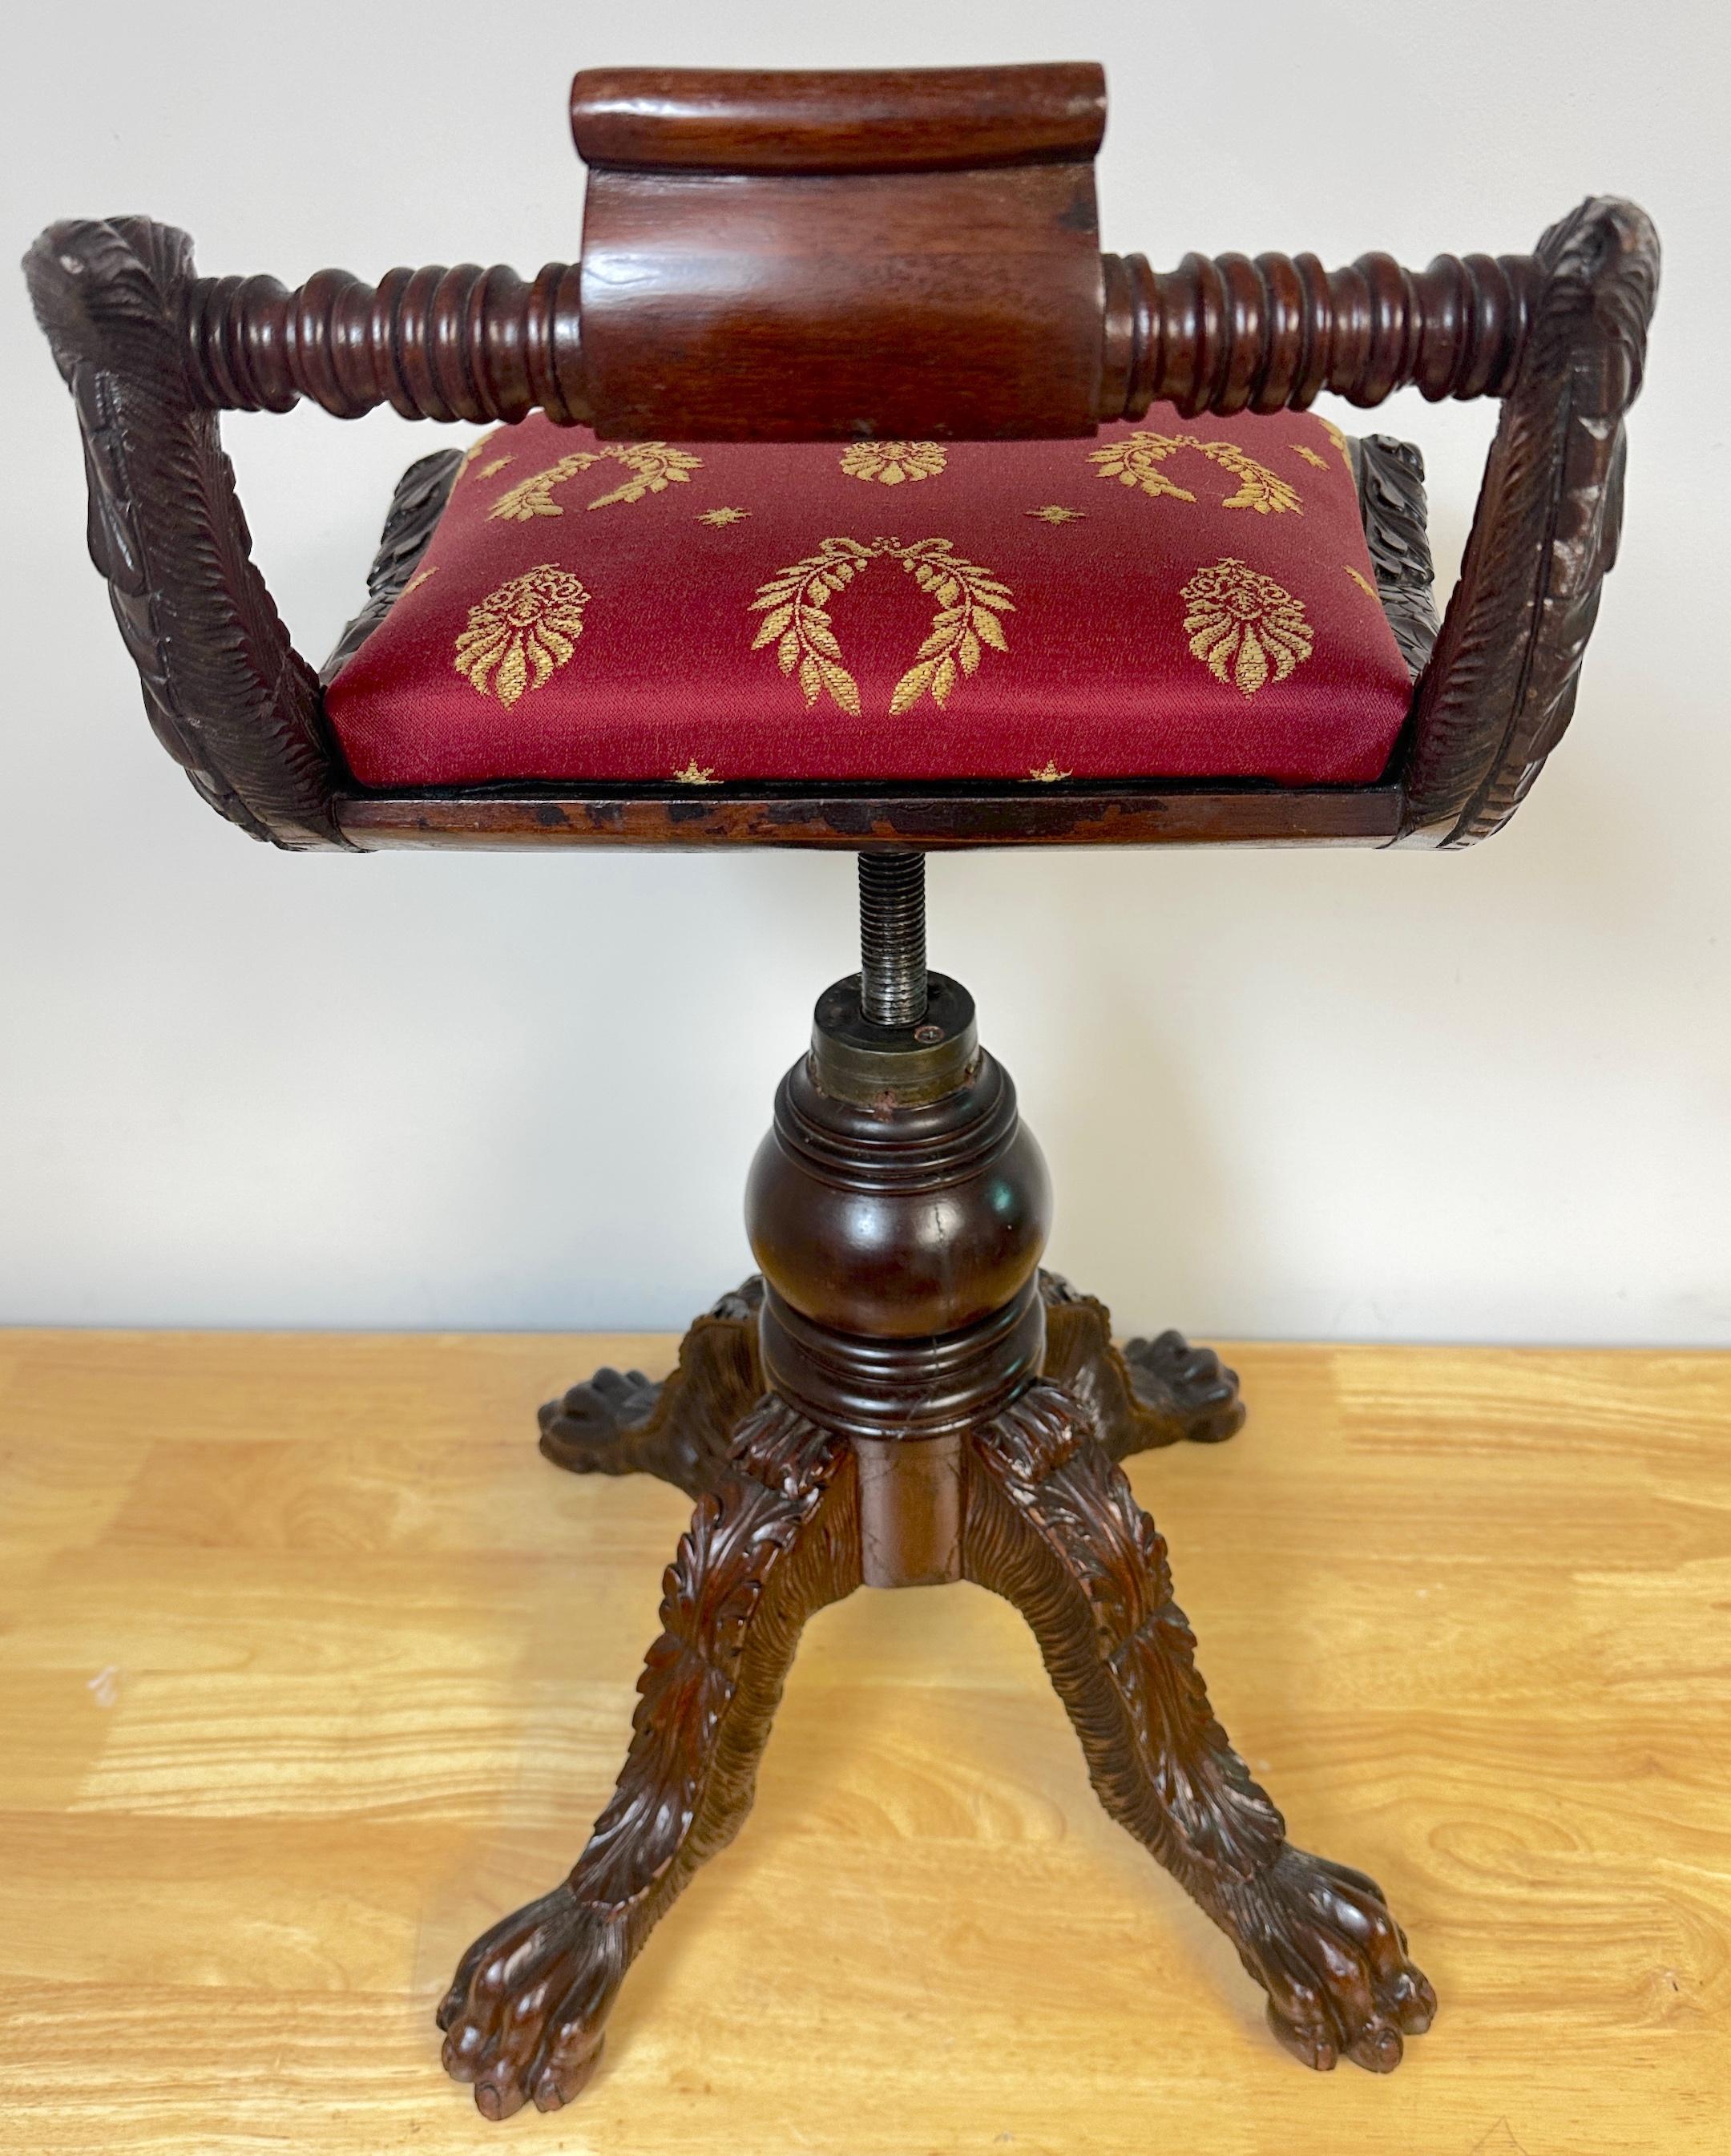 Upholstery Classical Carved Hardwood  Piano Stool with Dolphins, New York, Circa 1825 For Sale